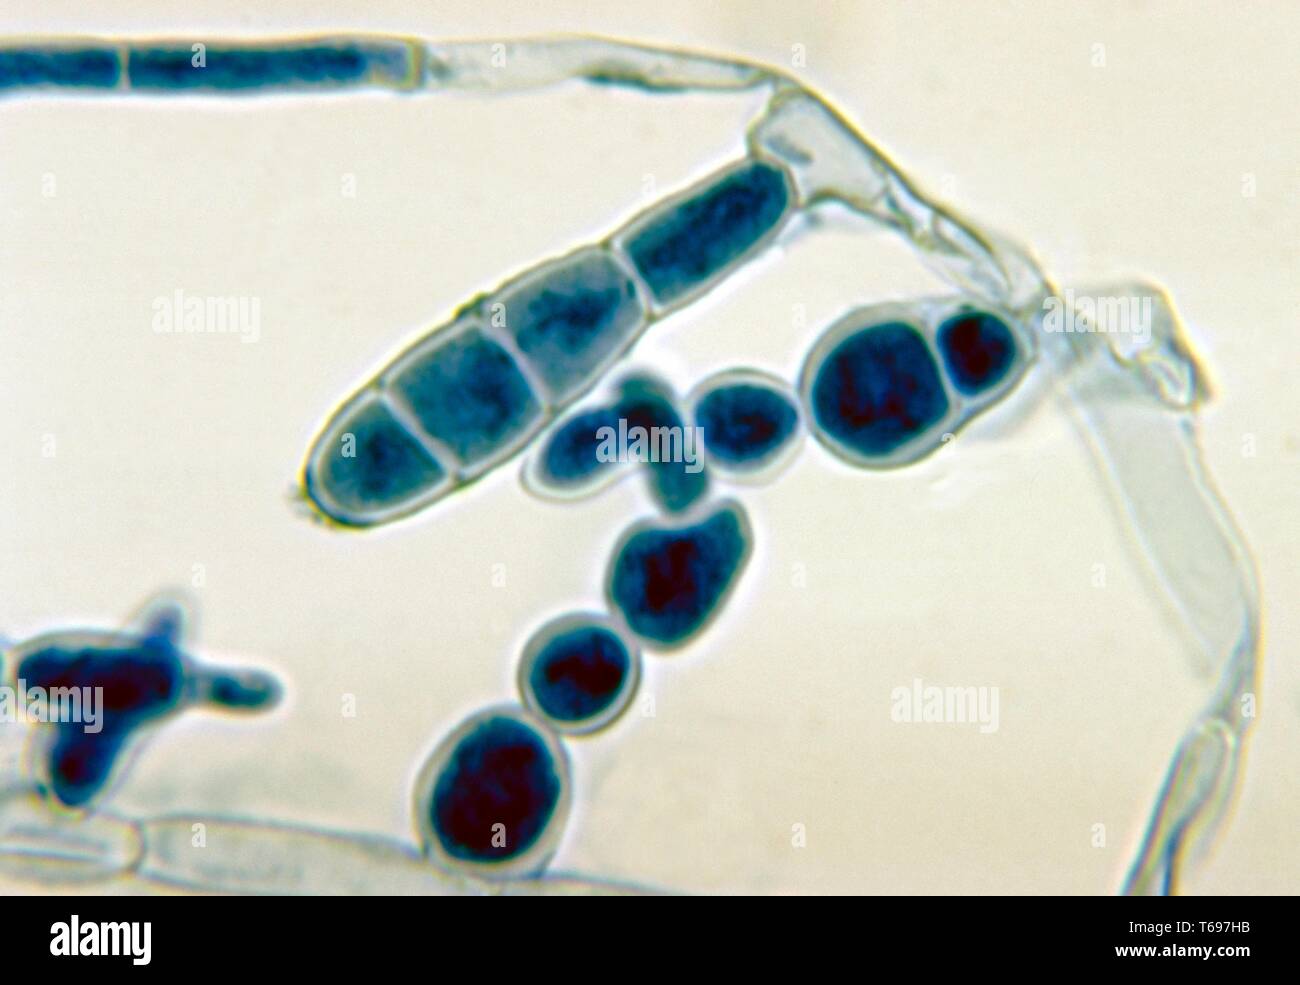 Photomicrograph of the macroconidia of the dermatophytic fungus Epidermophyton floccosum, 1972. Image courtesy Centers for Disease Control and Prevention (CDC) / Dr Libero Ajello. () Stock Photo